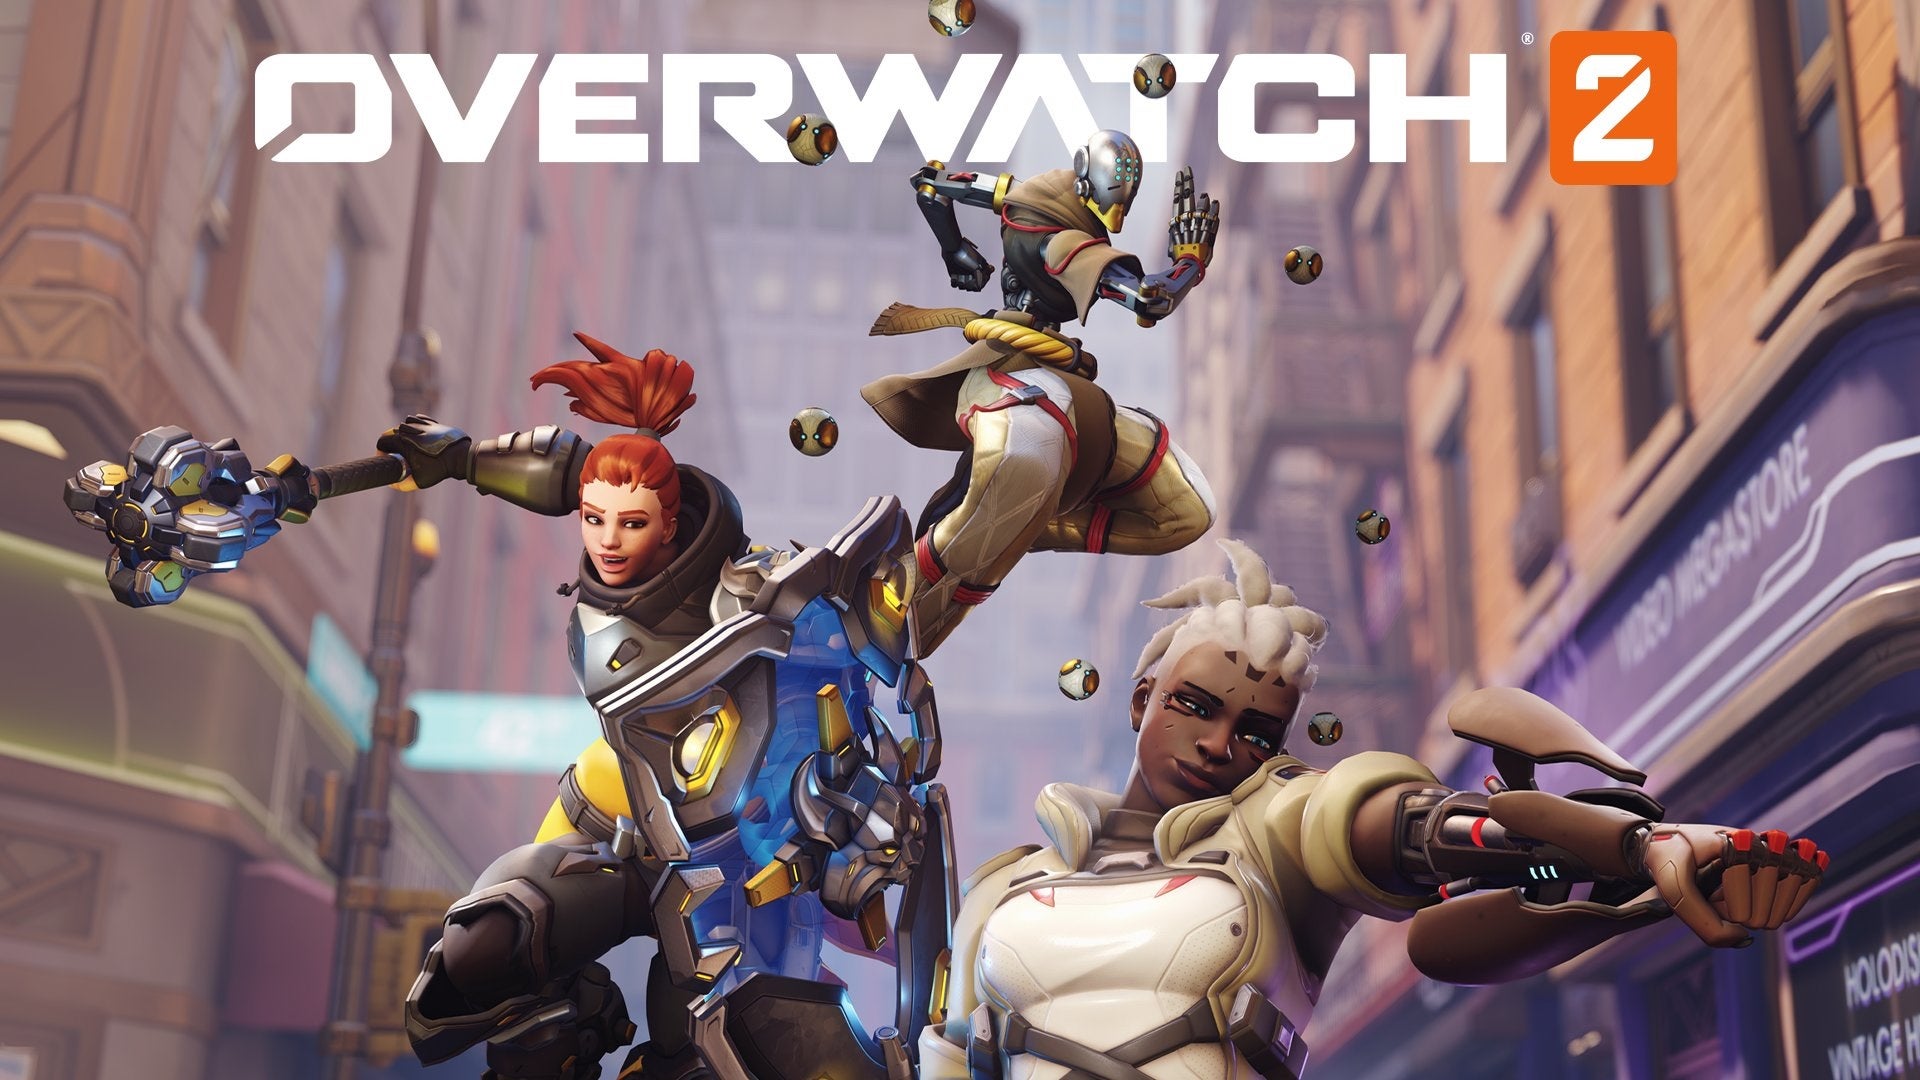 Three Overwatch heros jumping into the fray.